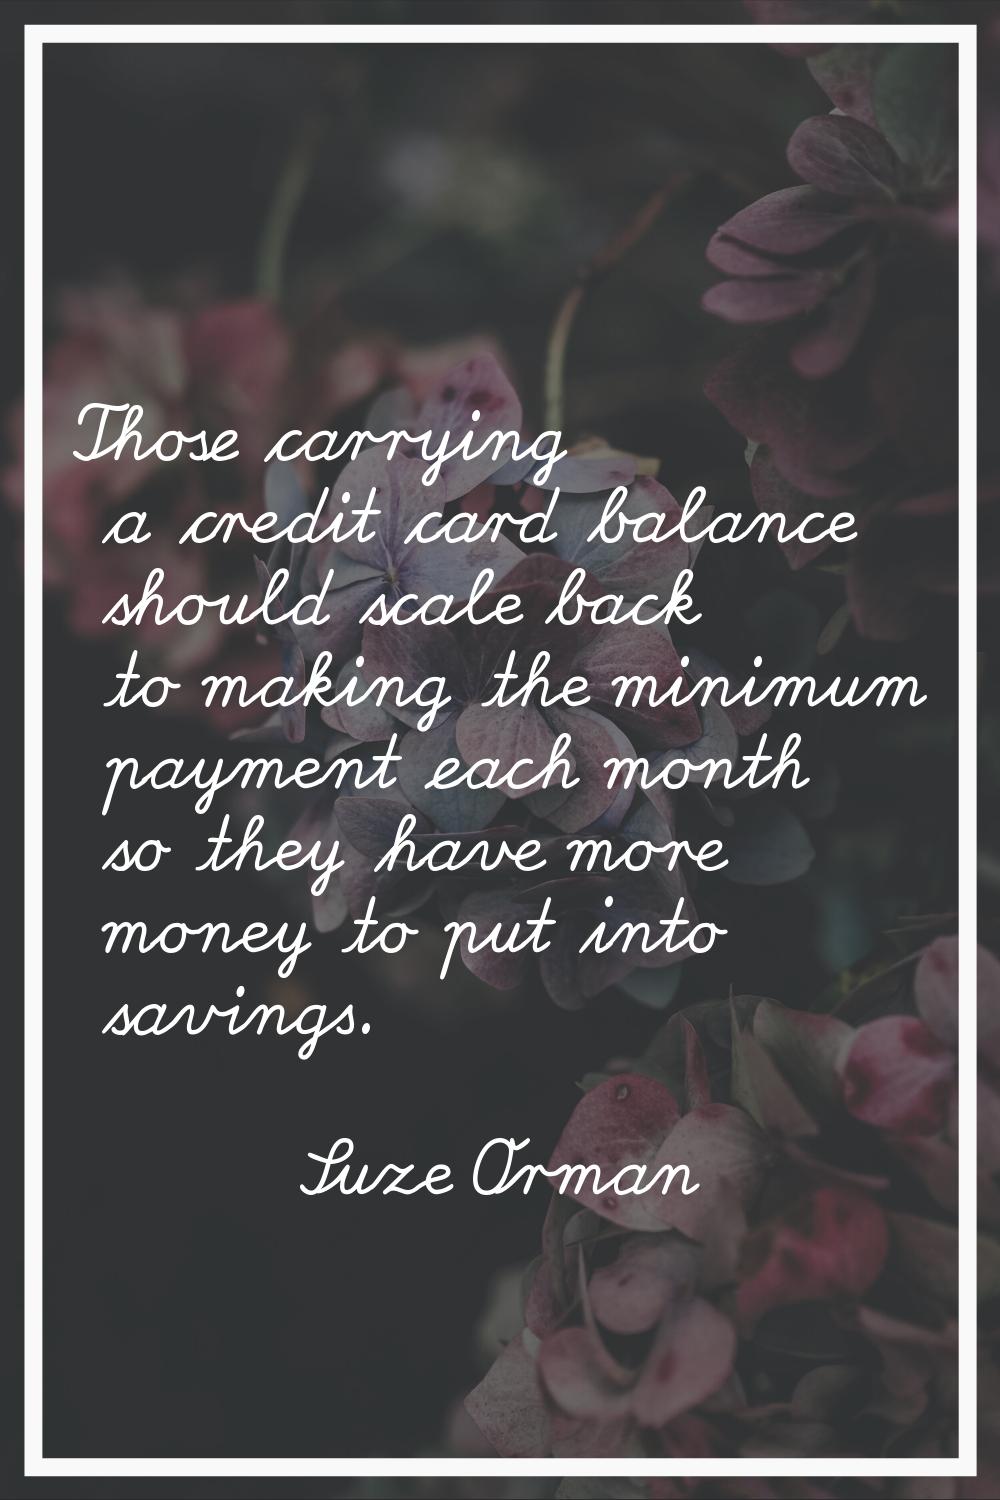 Those carrying a credit card balance should scale back to making the minimum payment each month so 